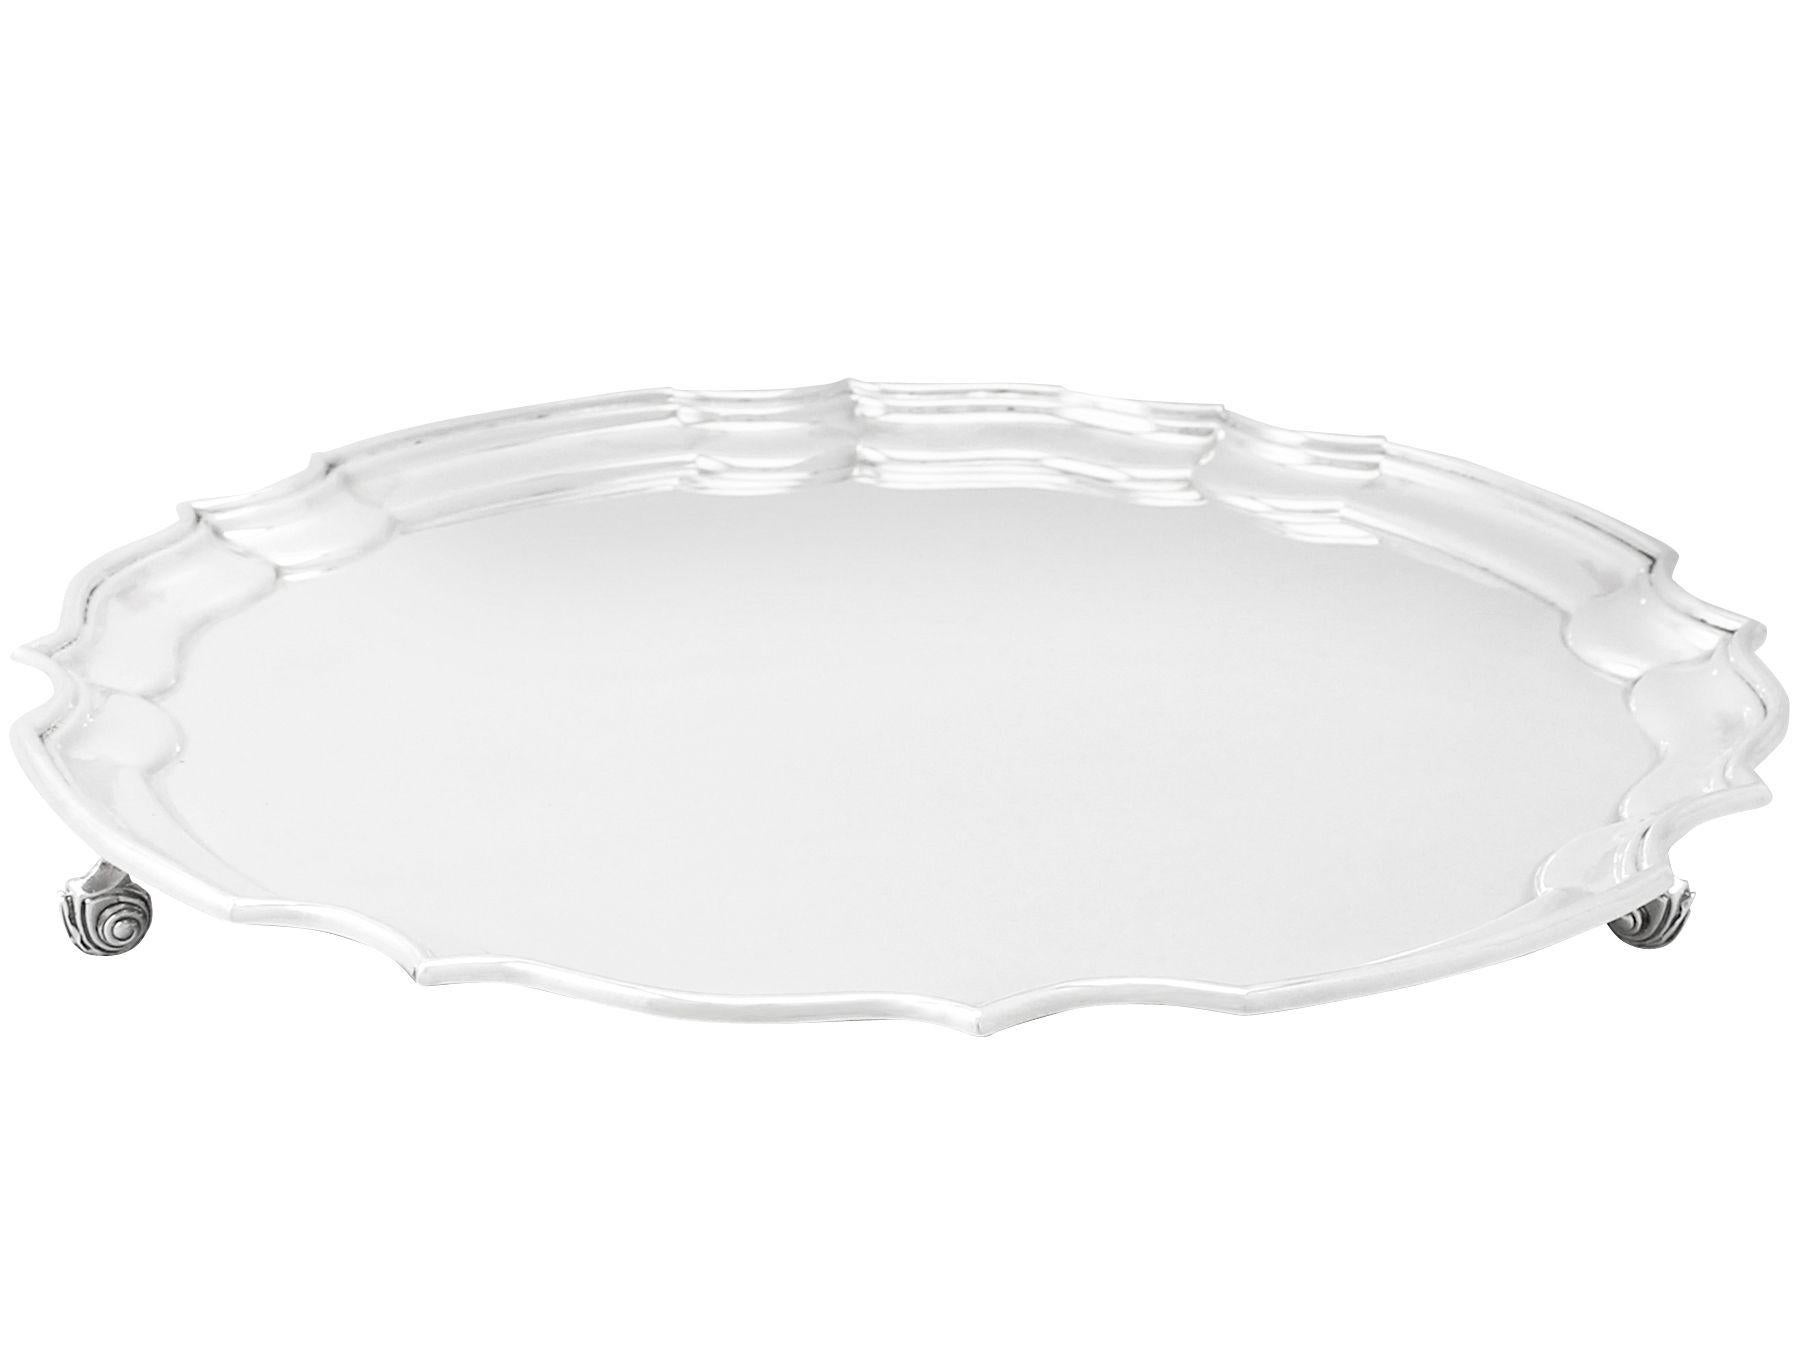 A fine and impressive vintage Elizabeth II English sterling silver salver, an addition to our silver dining collection

This fine vintage Elizabeth II English sterling silver salver has a circular shaped form onto three feet.

The surface of this